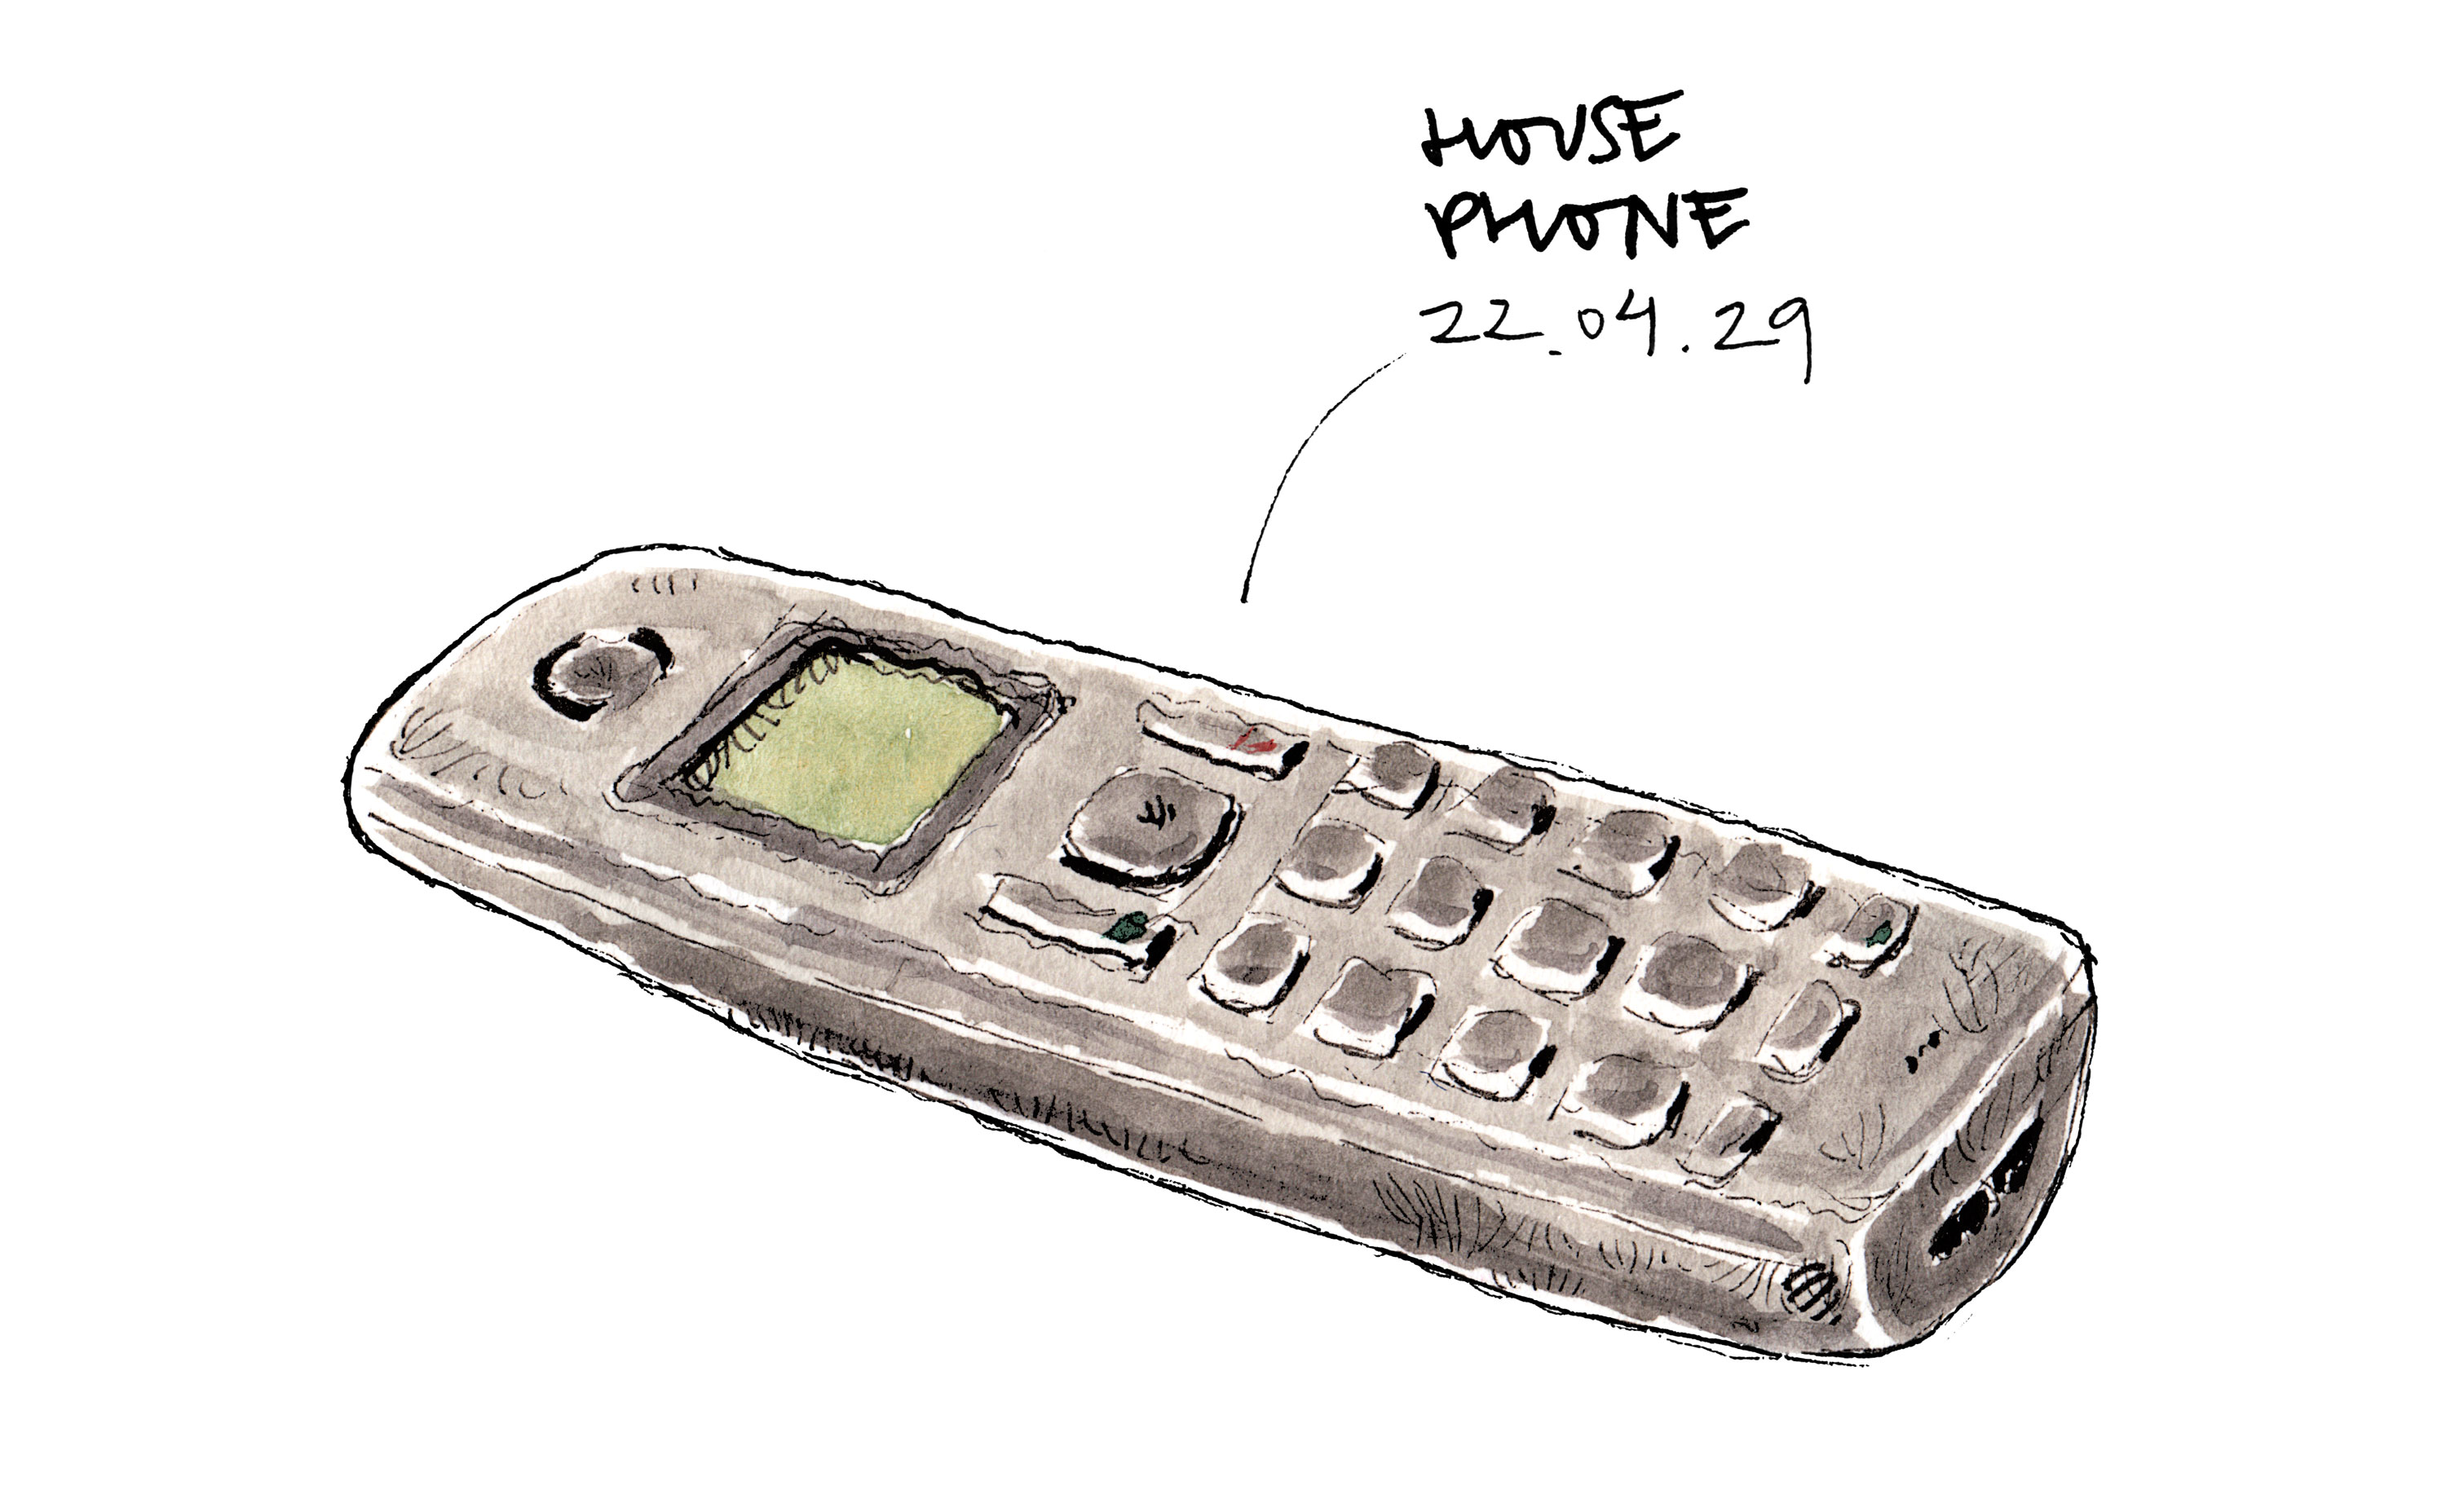 Sketch of a wireless phone.